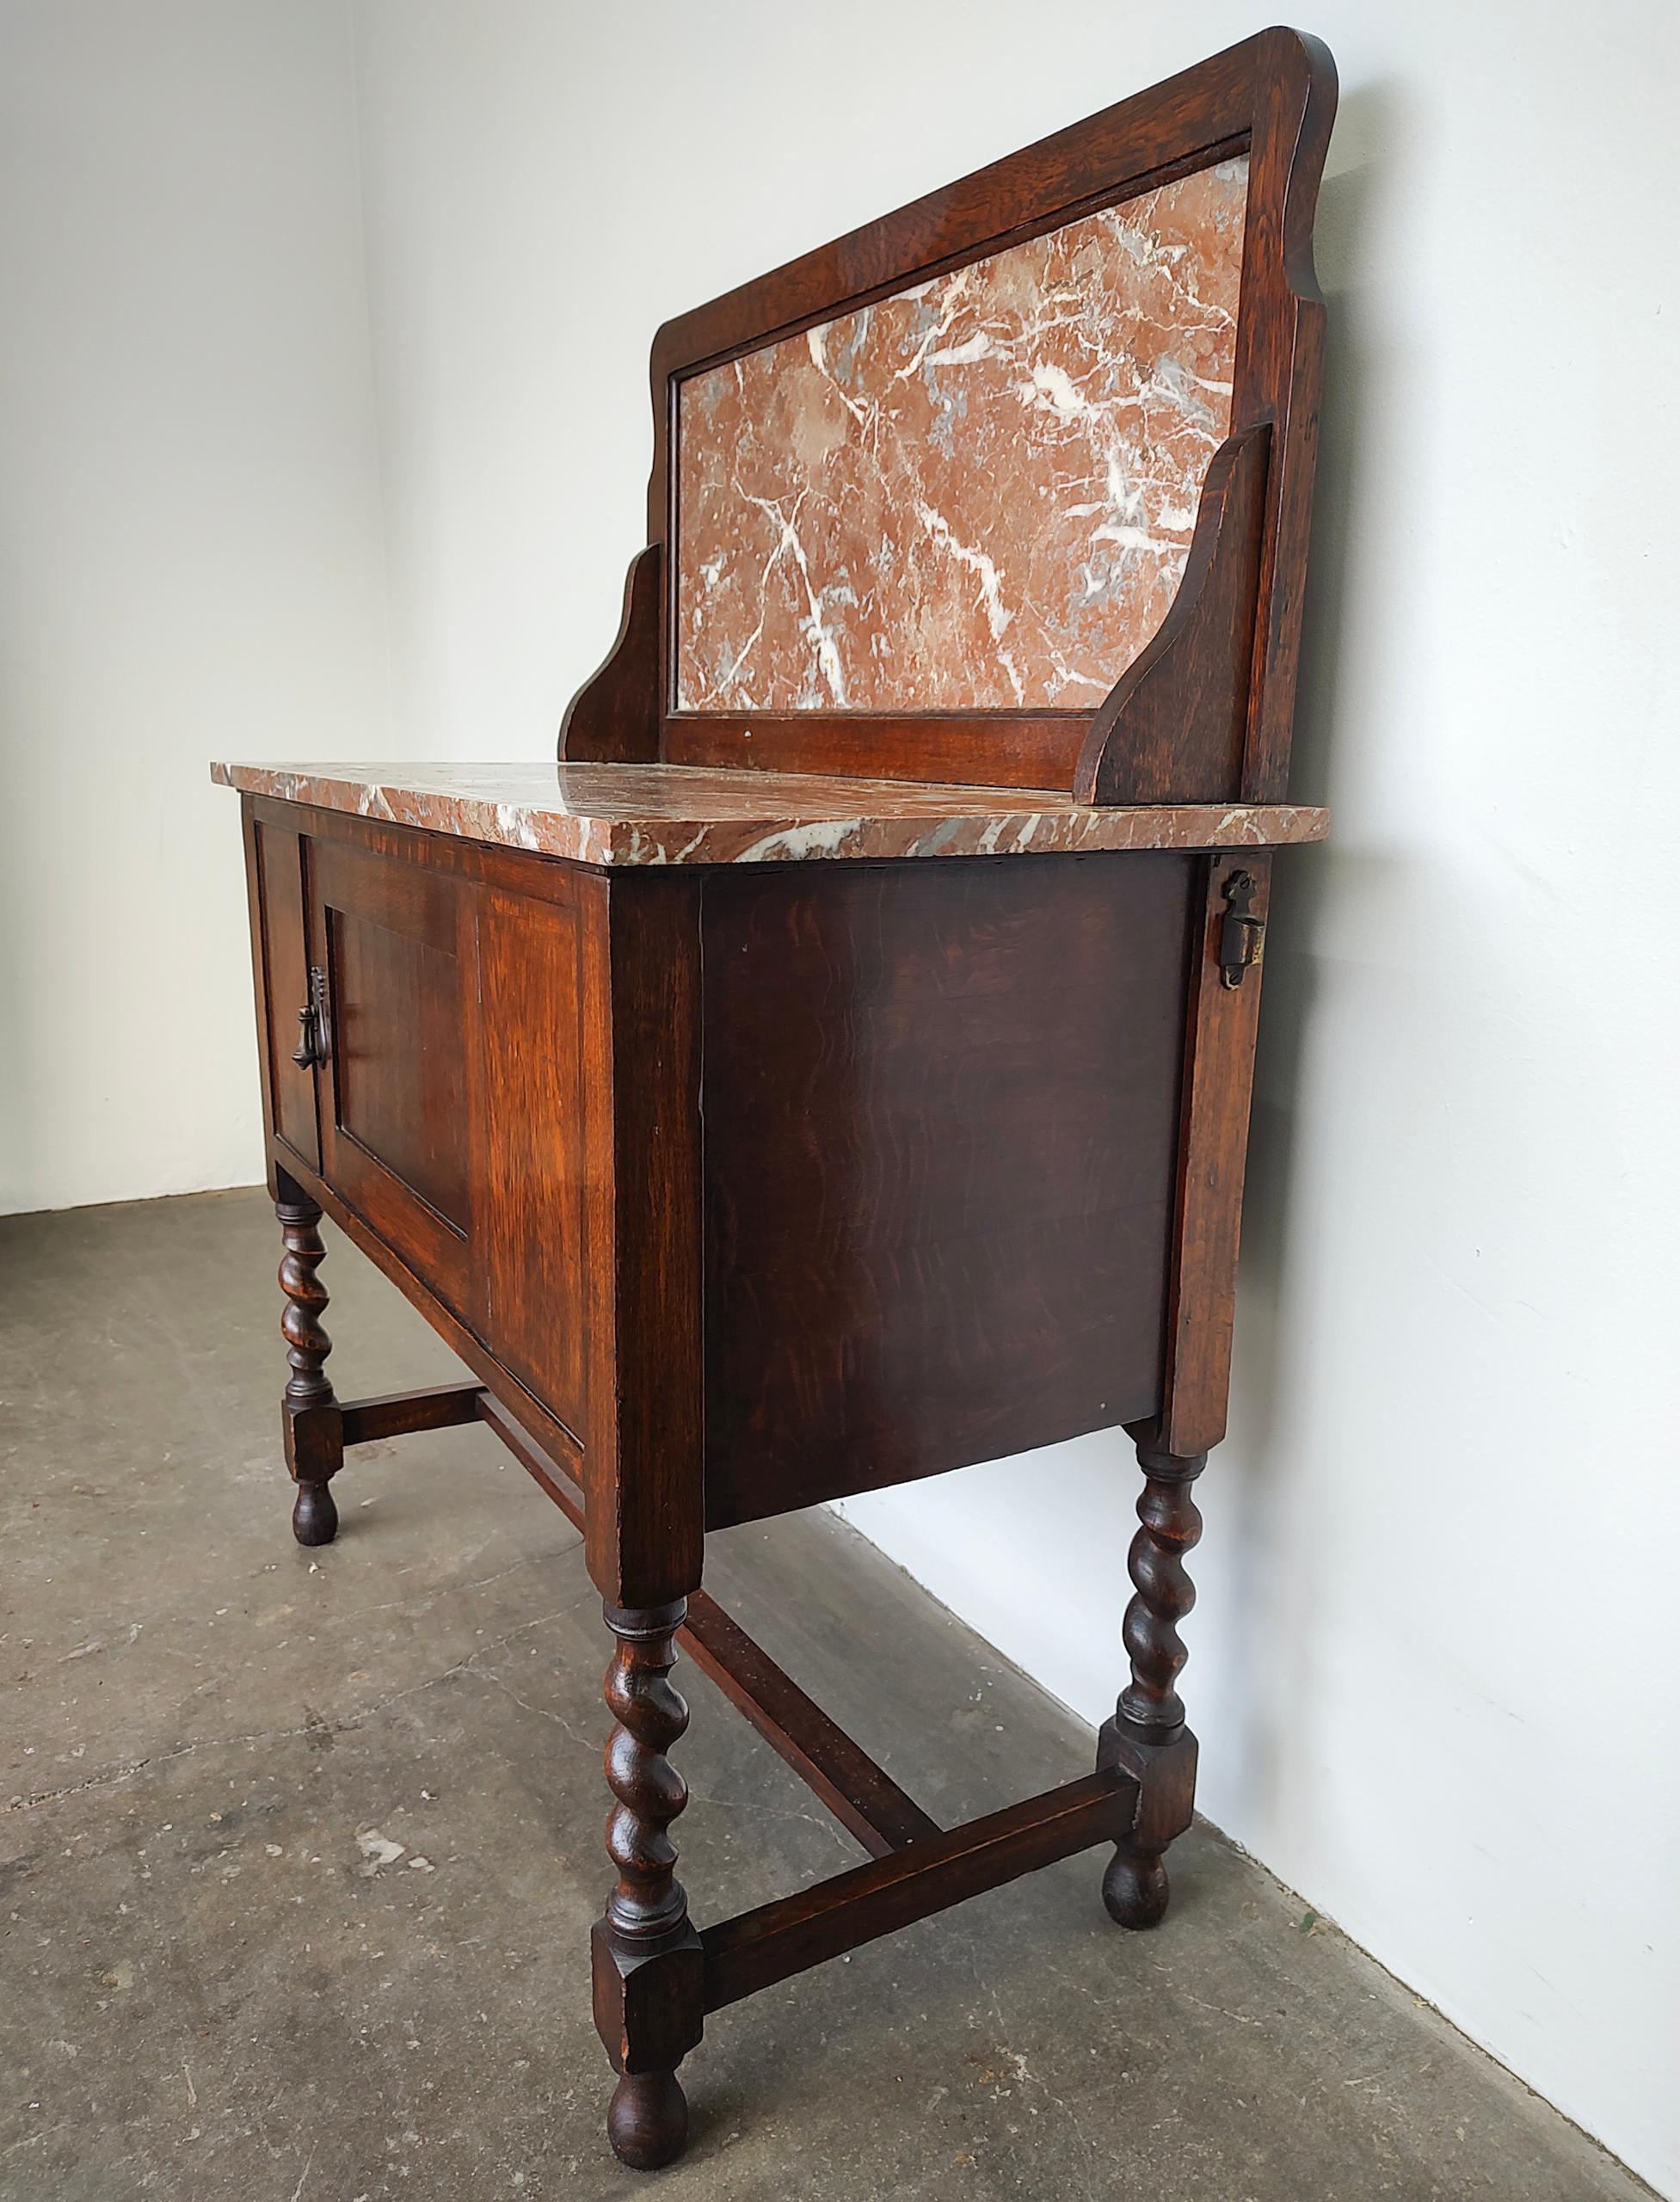 Unknown Early 20th-Century Antique Oak and Pink Stone Wash Stand Cabinet